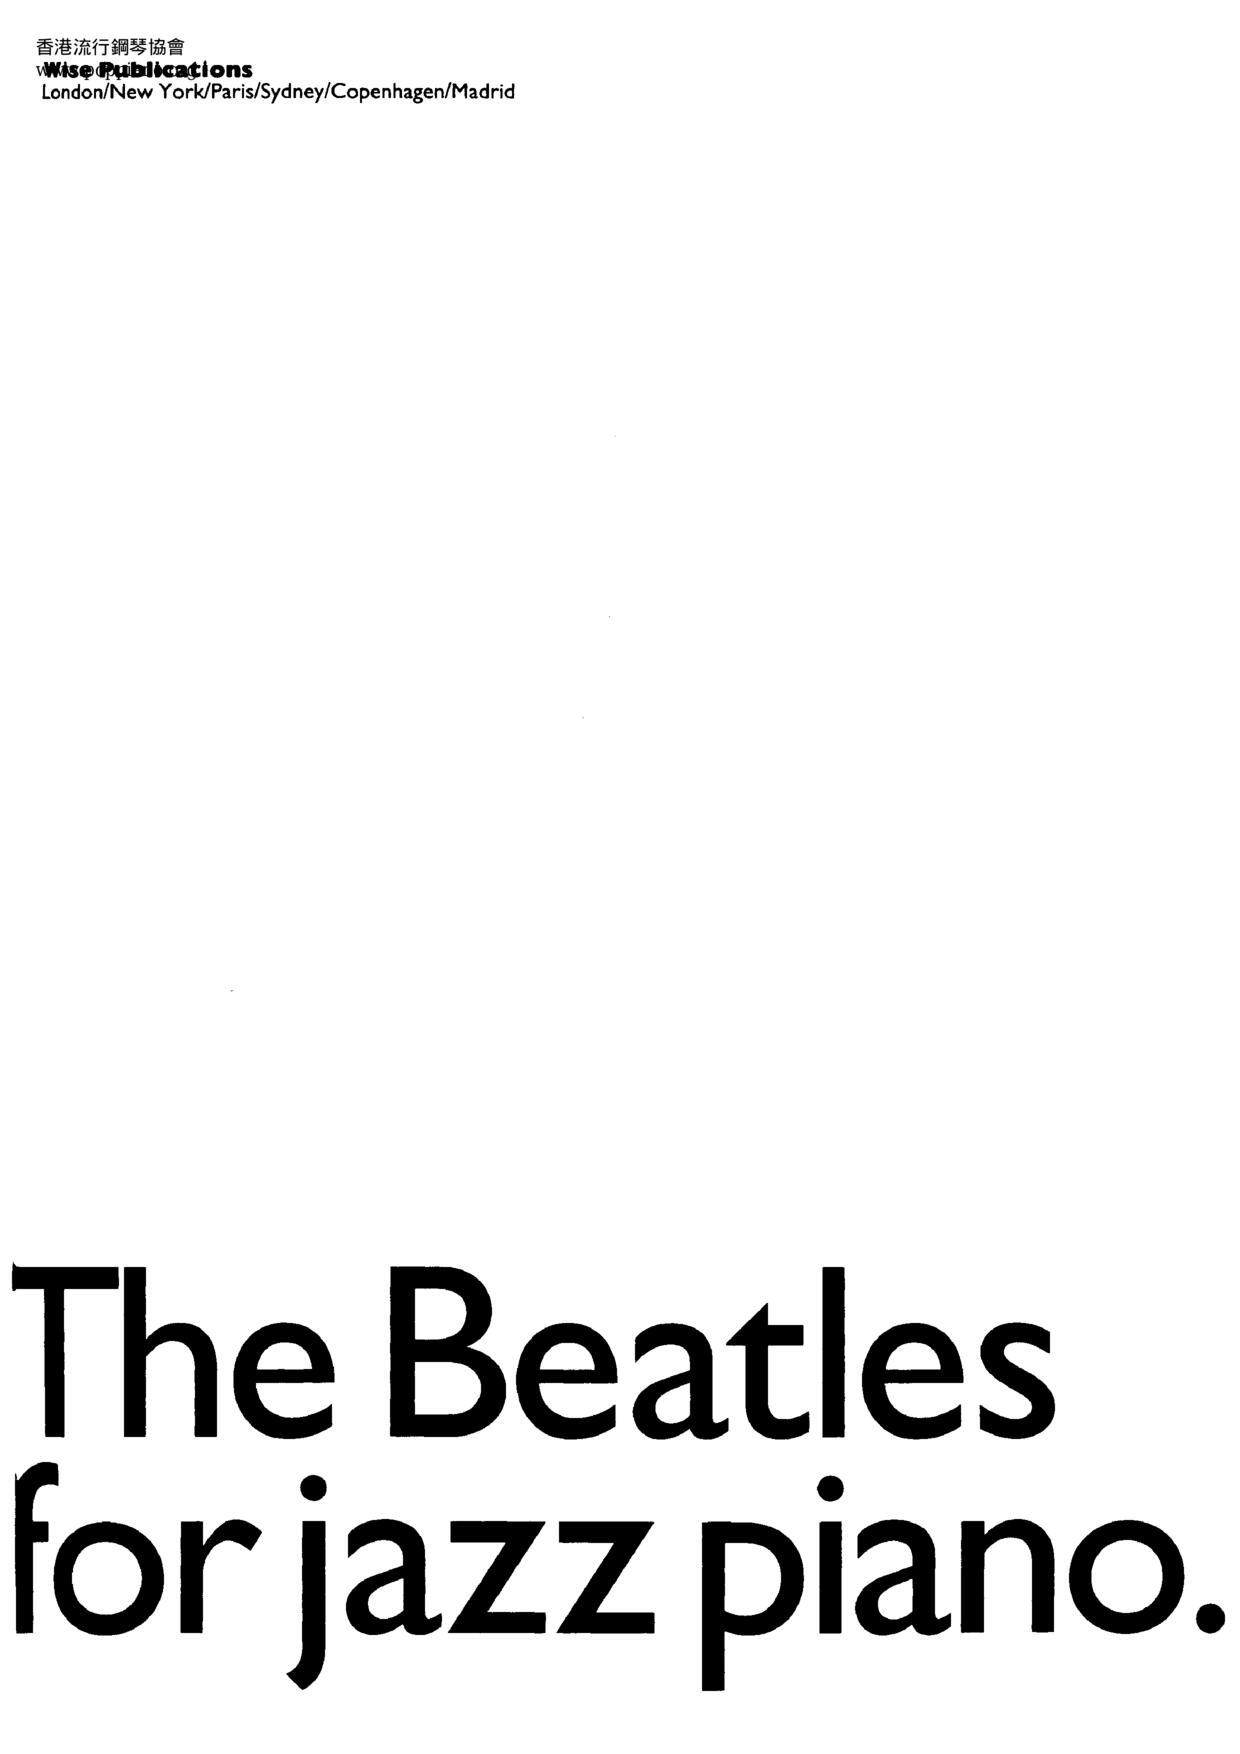 The Beatles For Jazz Piano 49 pages琴谱